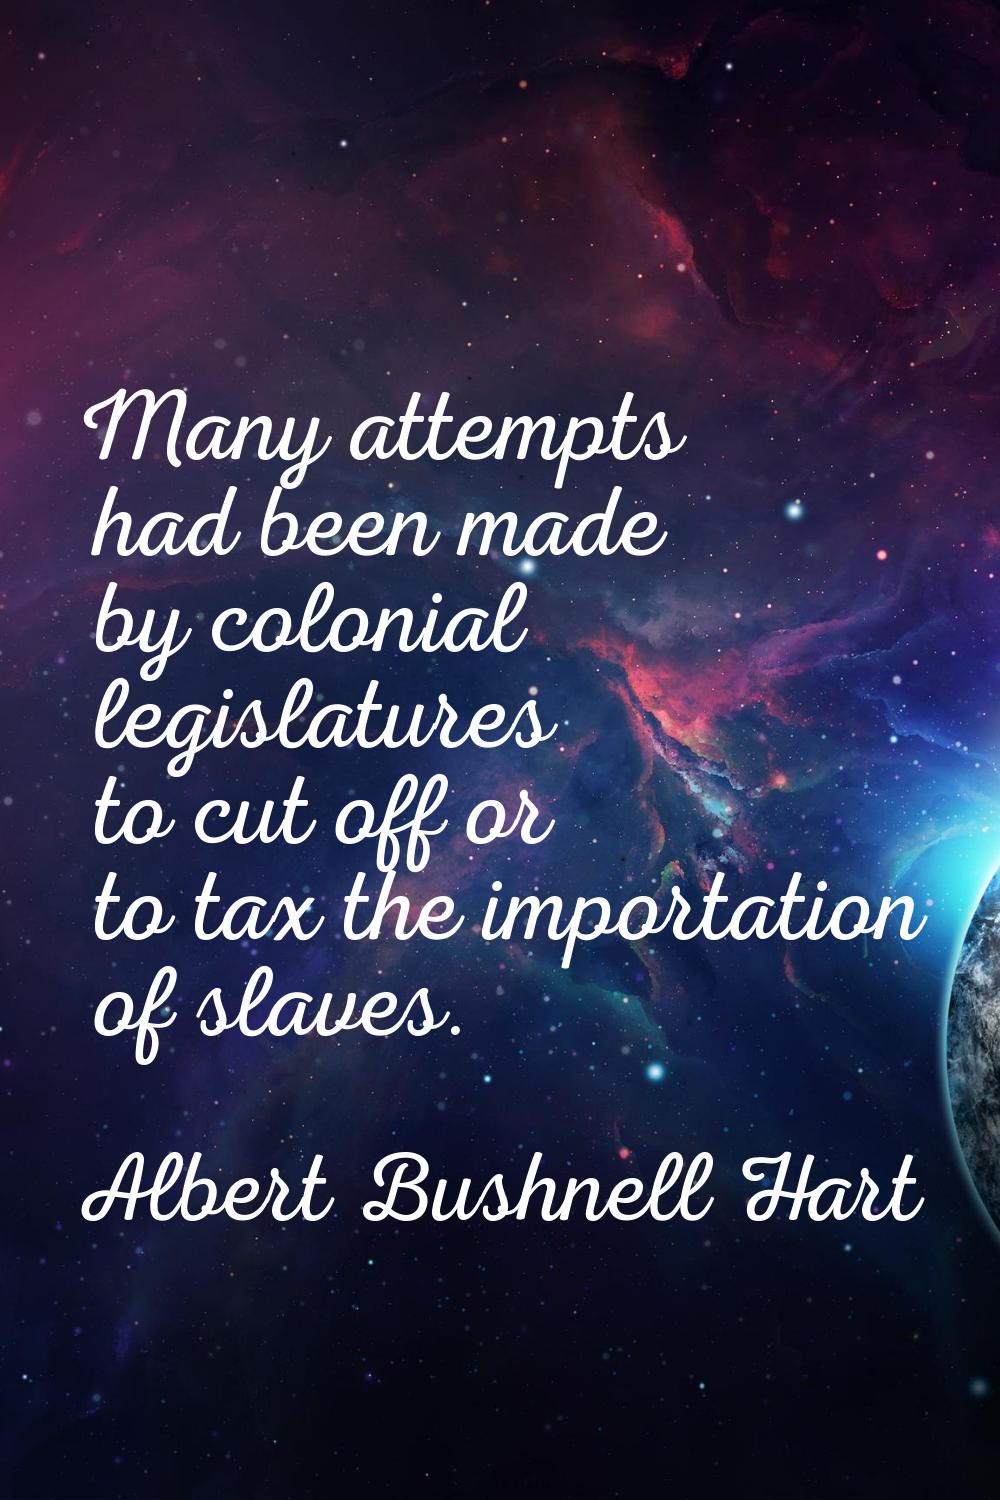 Many attempts had been made by colonial legislatures to cut off or to tax the importation of slaves